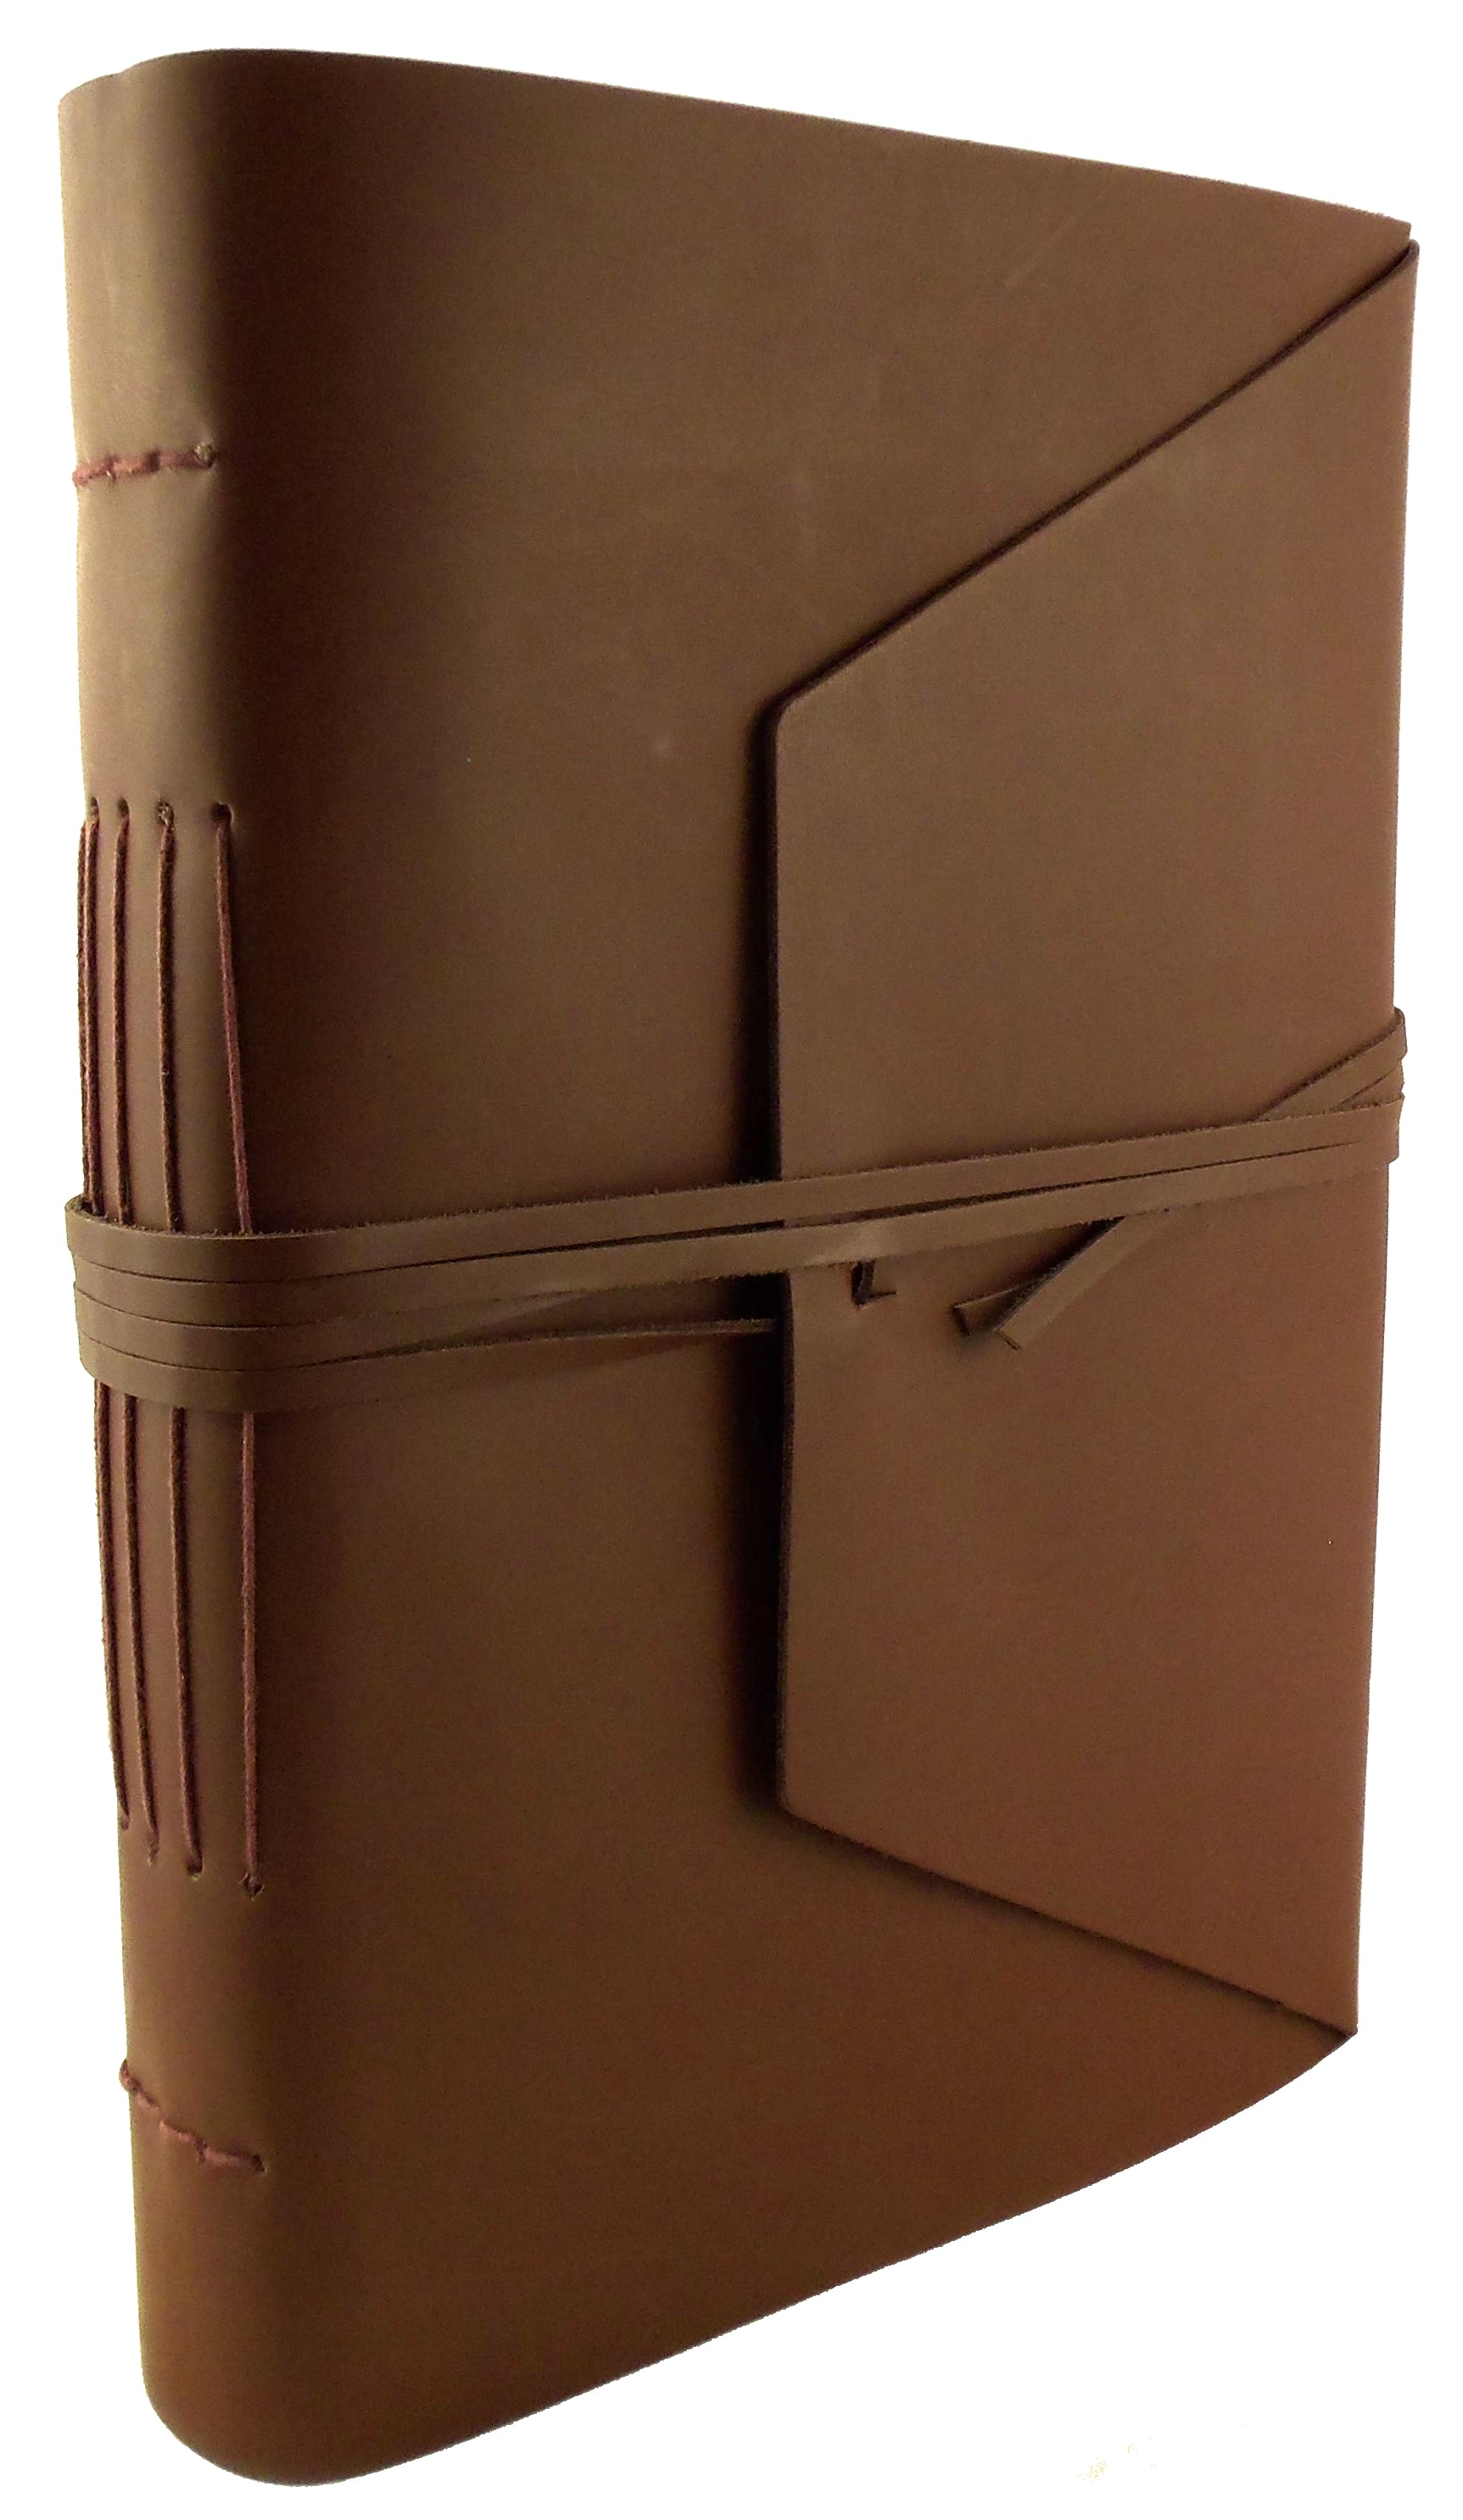 Large Genuine Leather Journal / Sketchbook with Gift Box - 380 Pages - 9 inch x 12 inch - Rustic Vintage Style, Brown